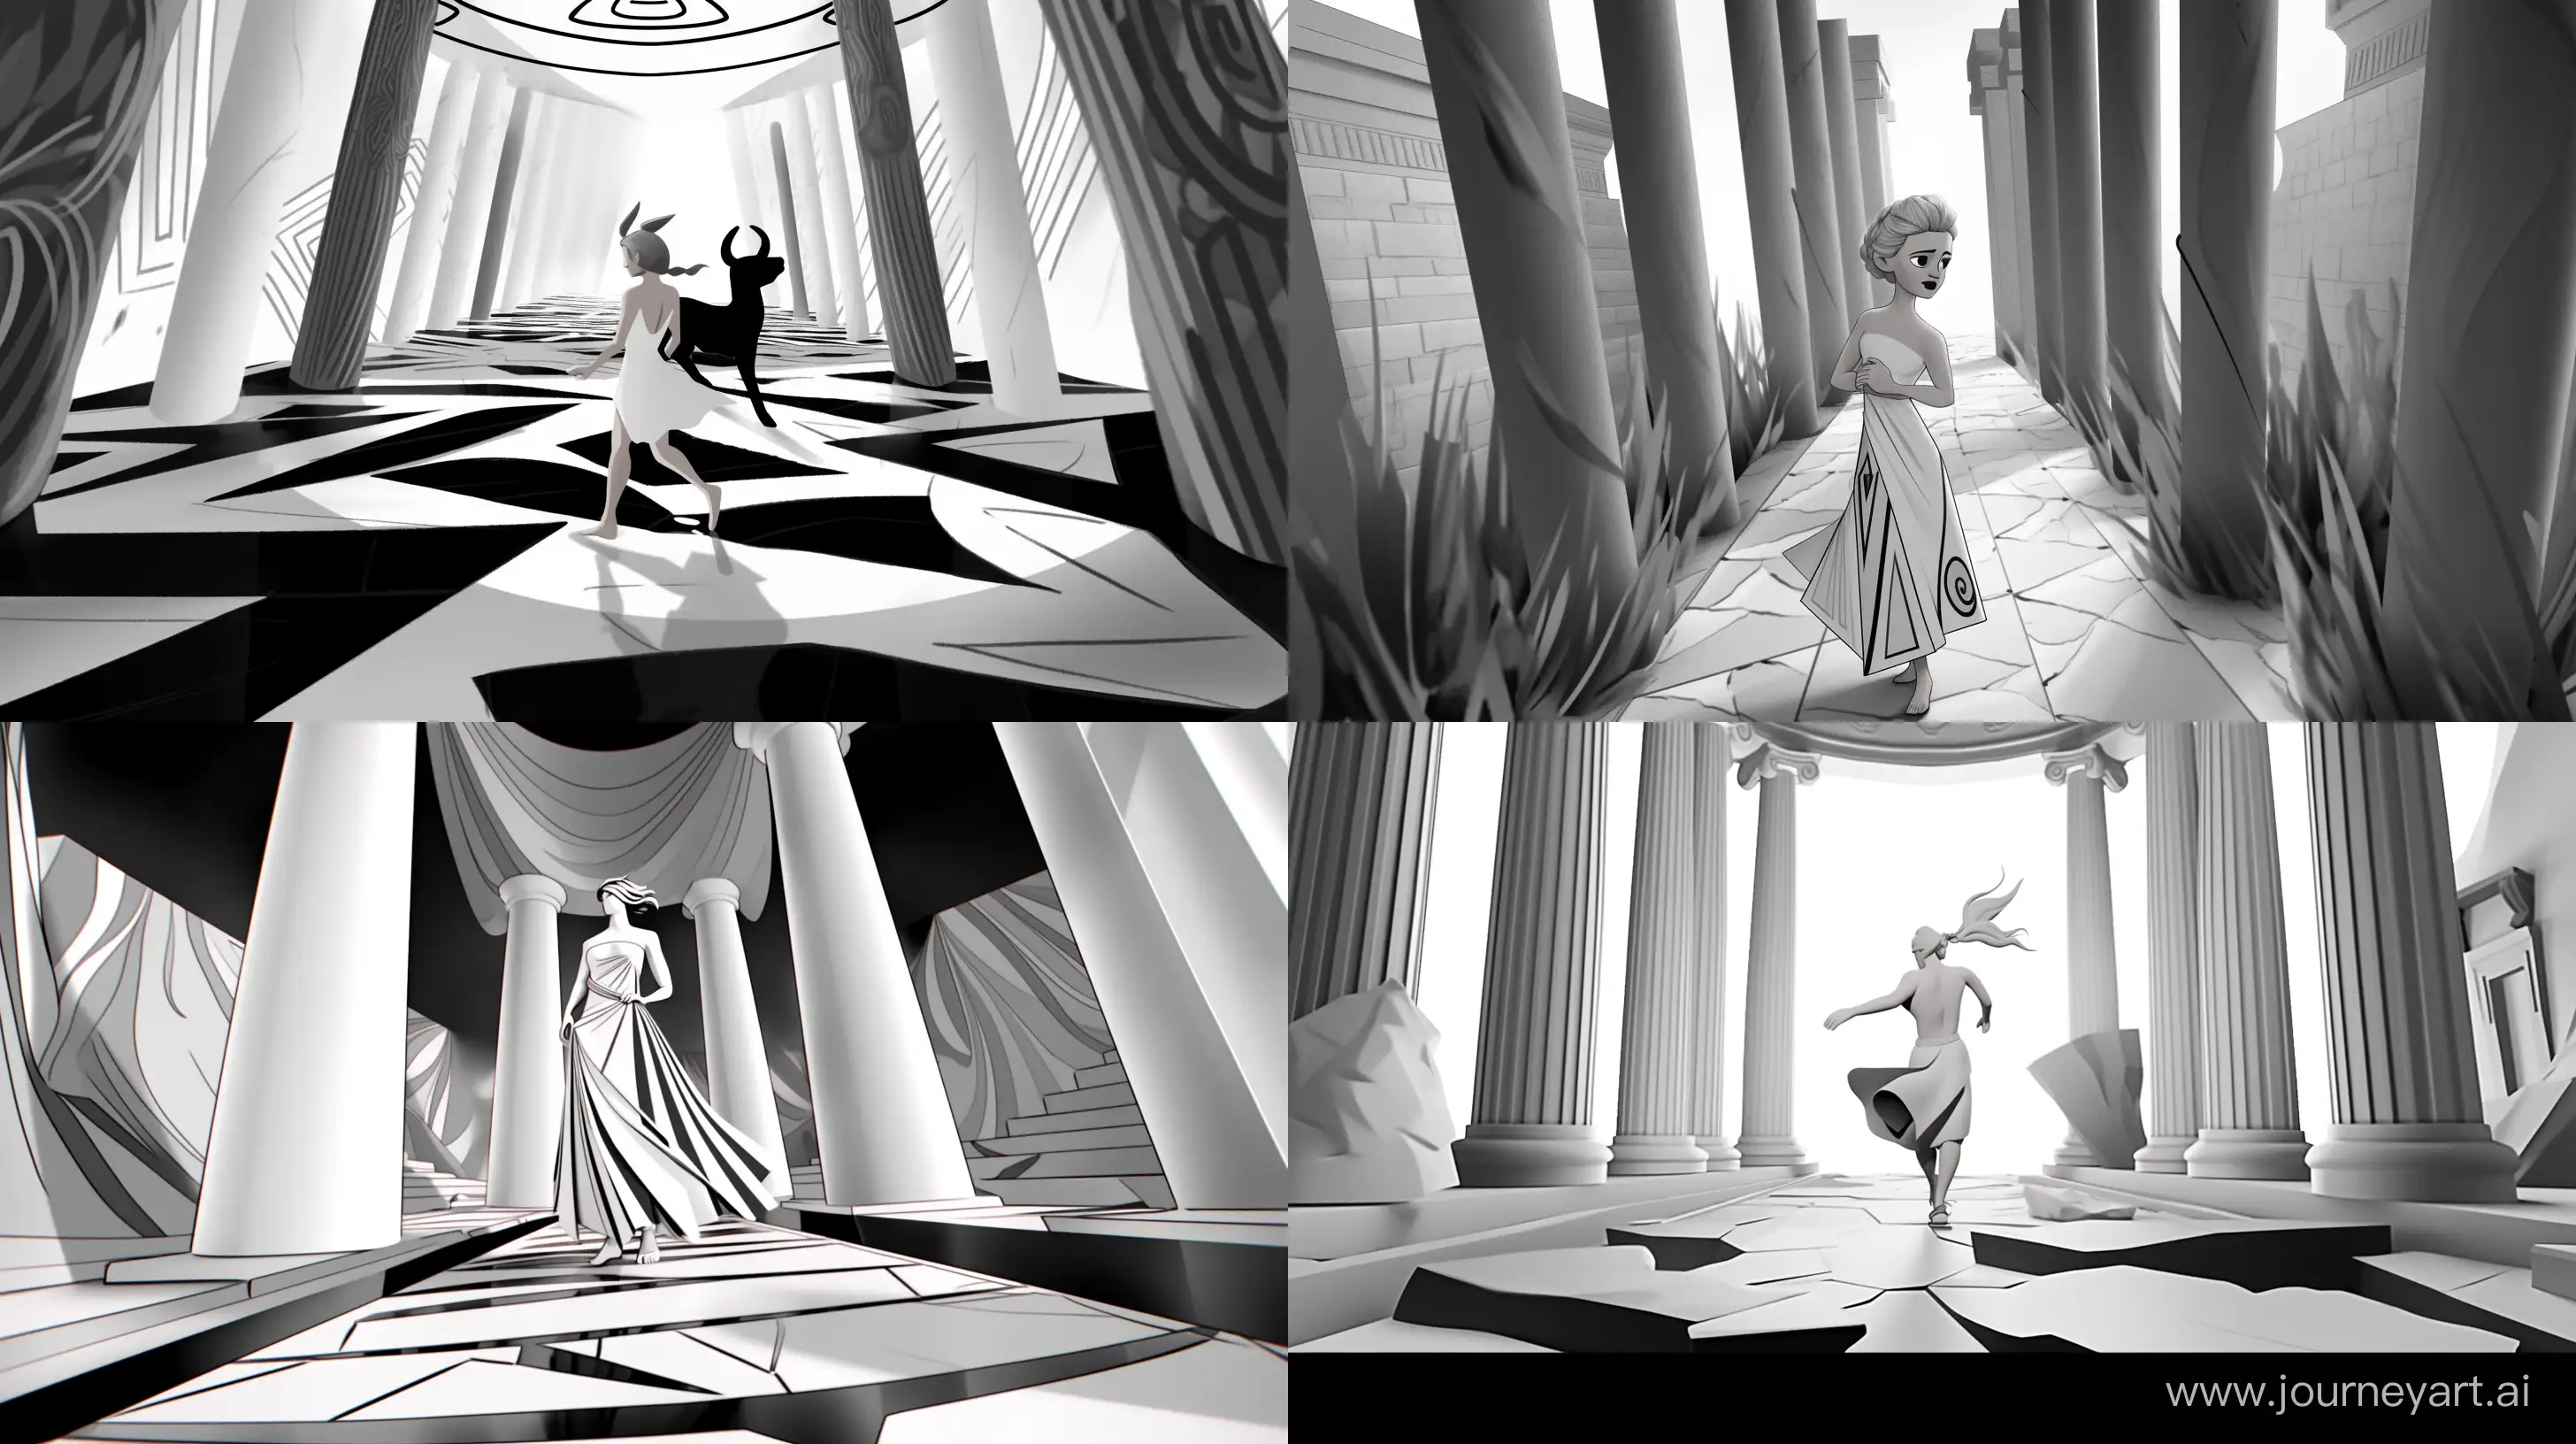 Empowering-Journey-Through-the-Mind-Surreal-3D-Animation-of-a-Greek-Goddess-Confronting-Negativity